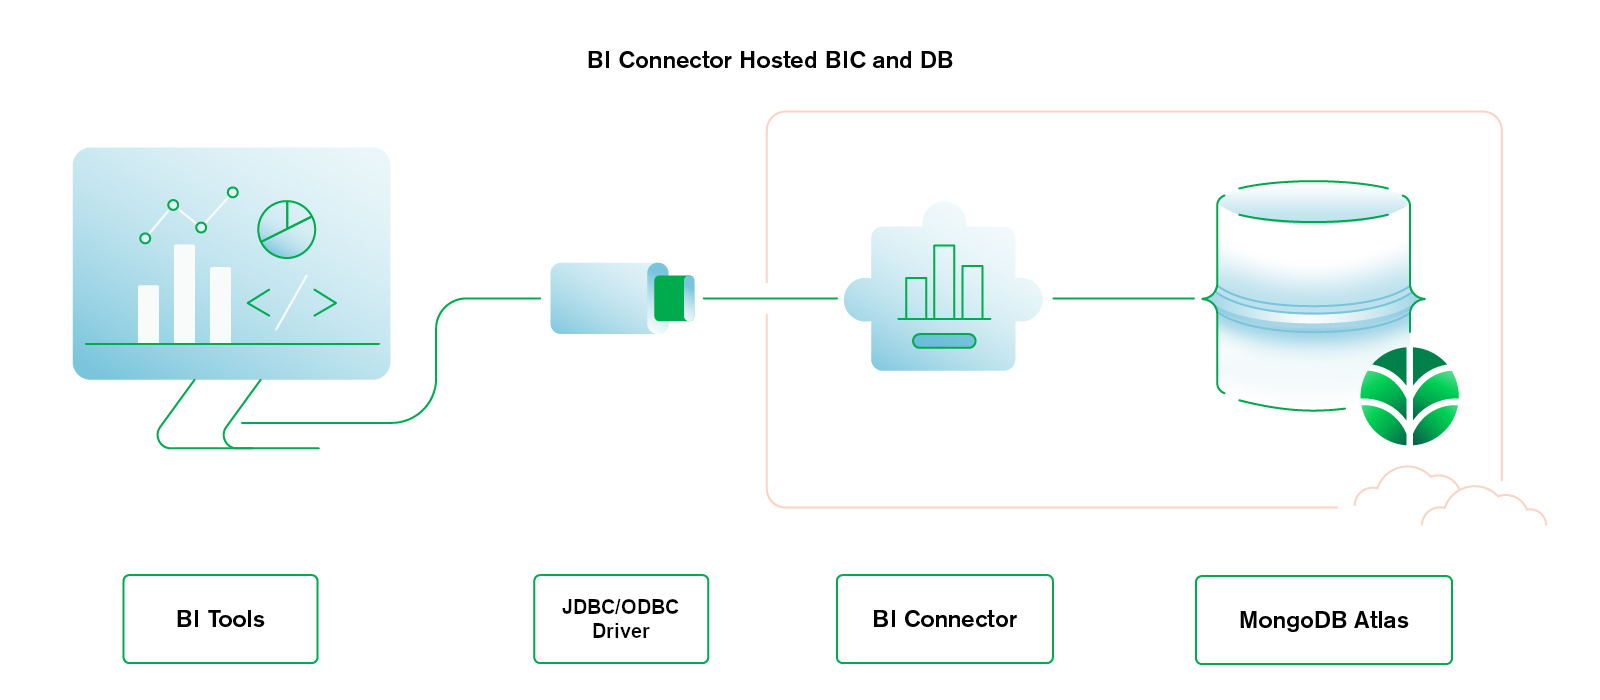 Hosted DB and BI Connector